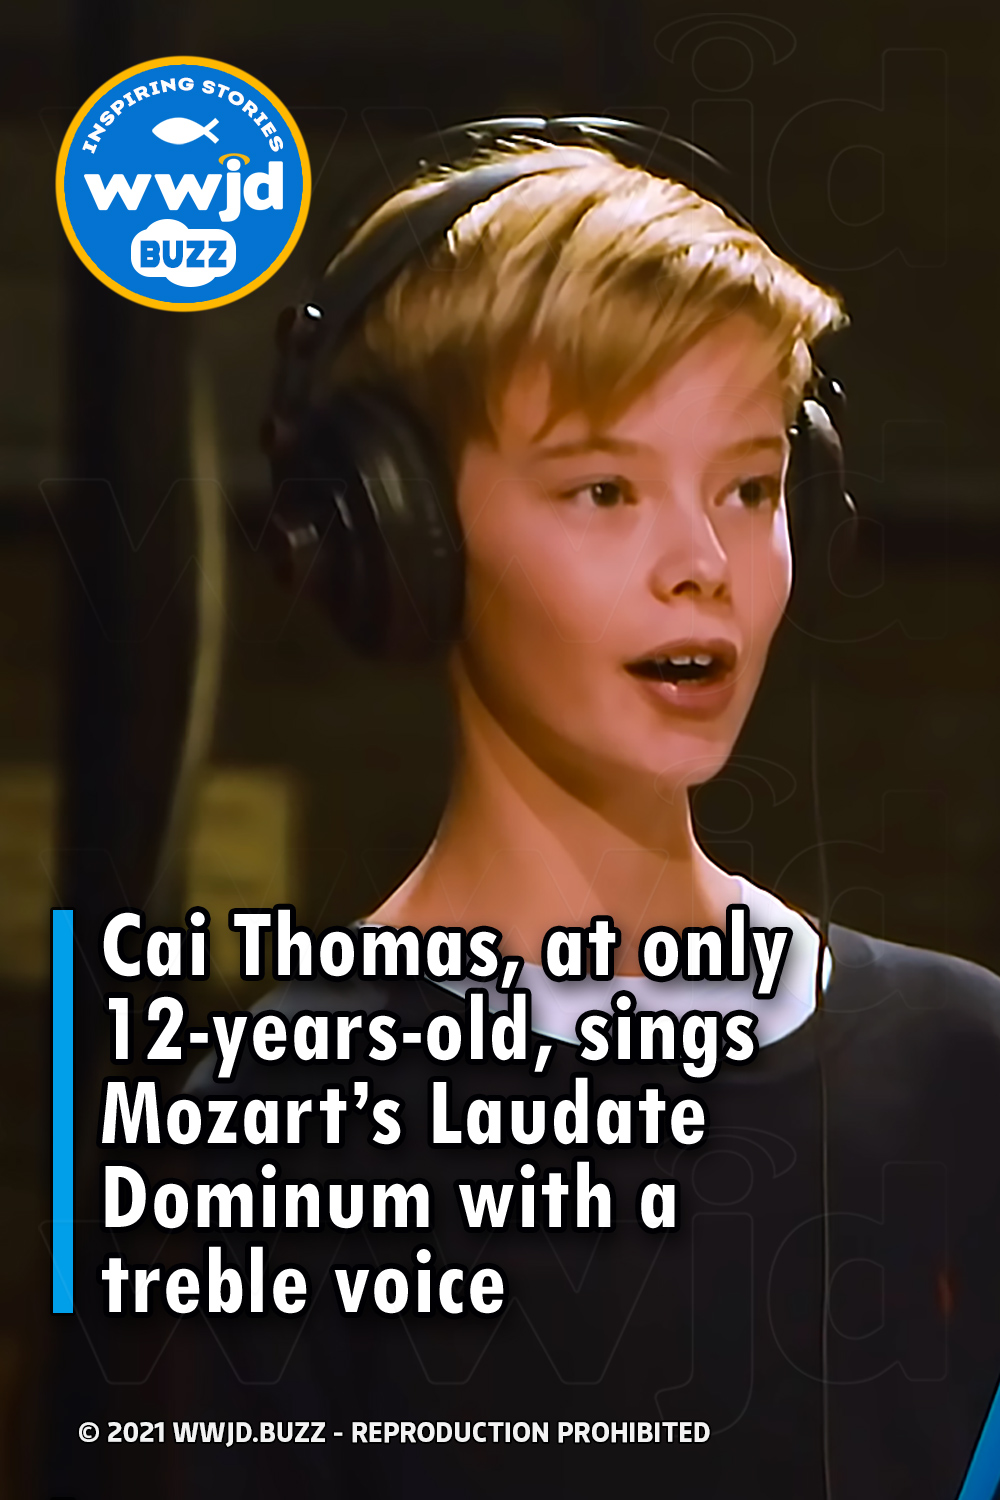 Cai Thomas, at only 12-years-old, sings Mozart’s Laudate Dominum with a treble voice